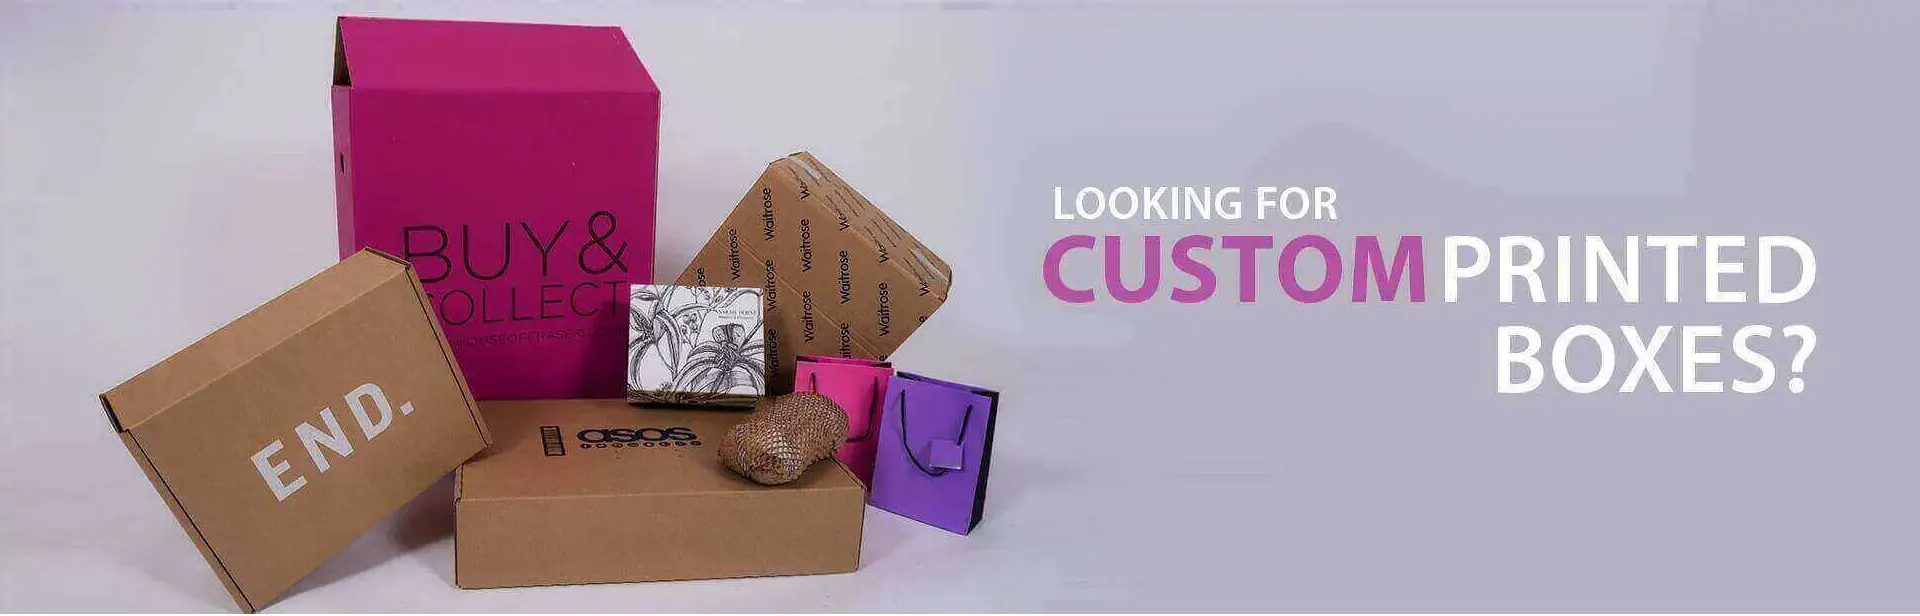 Now You can customize your boxes in many different ways